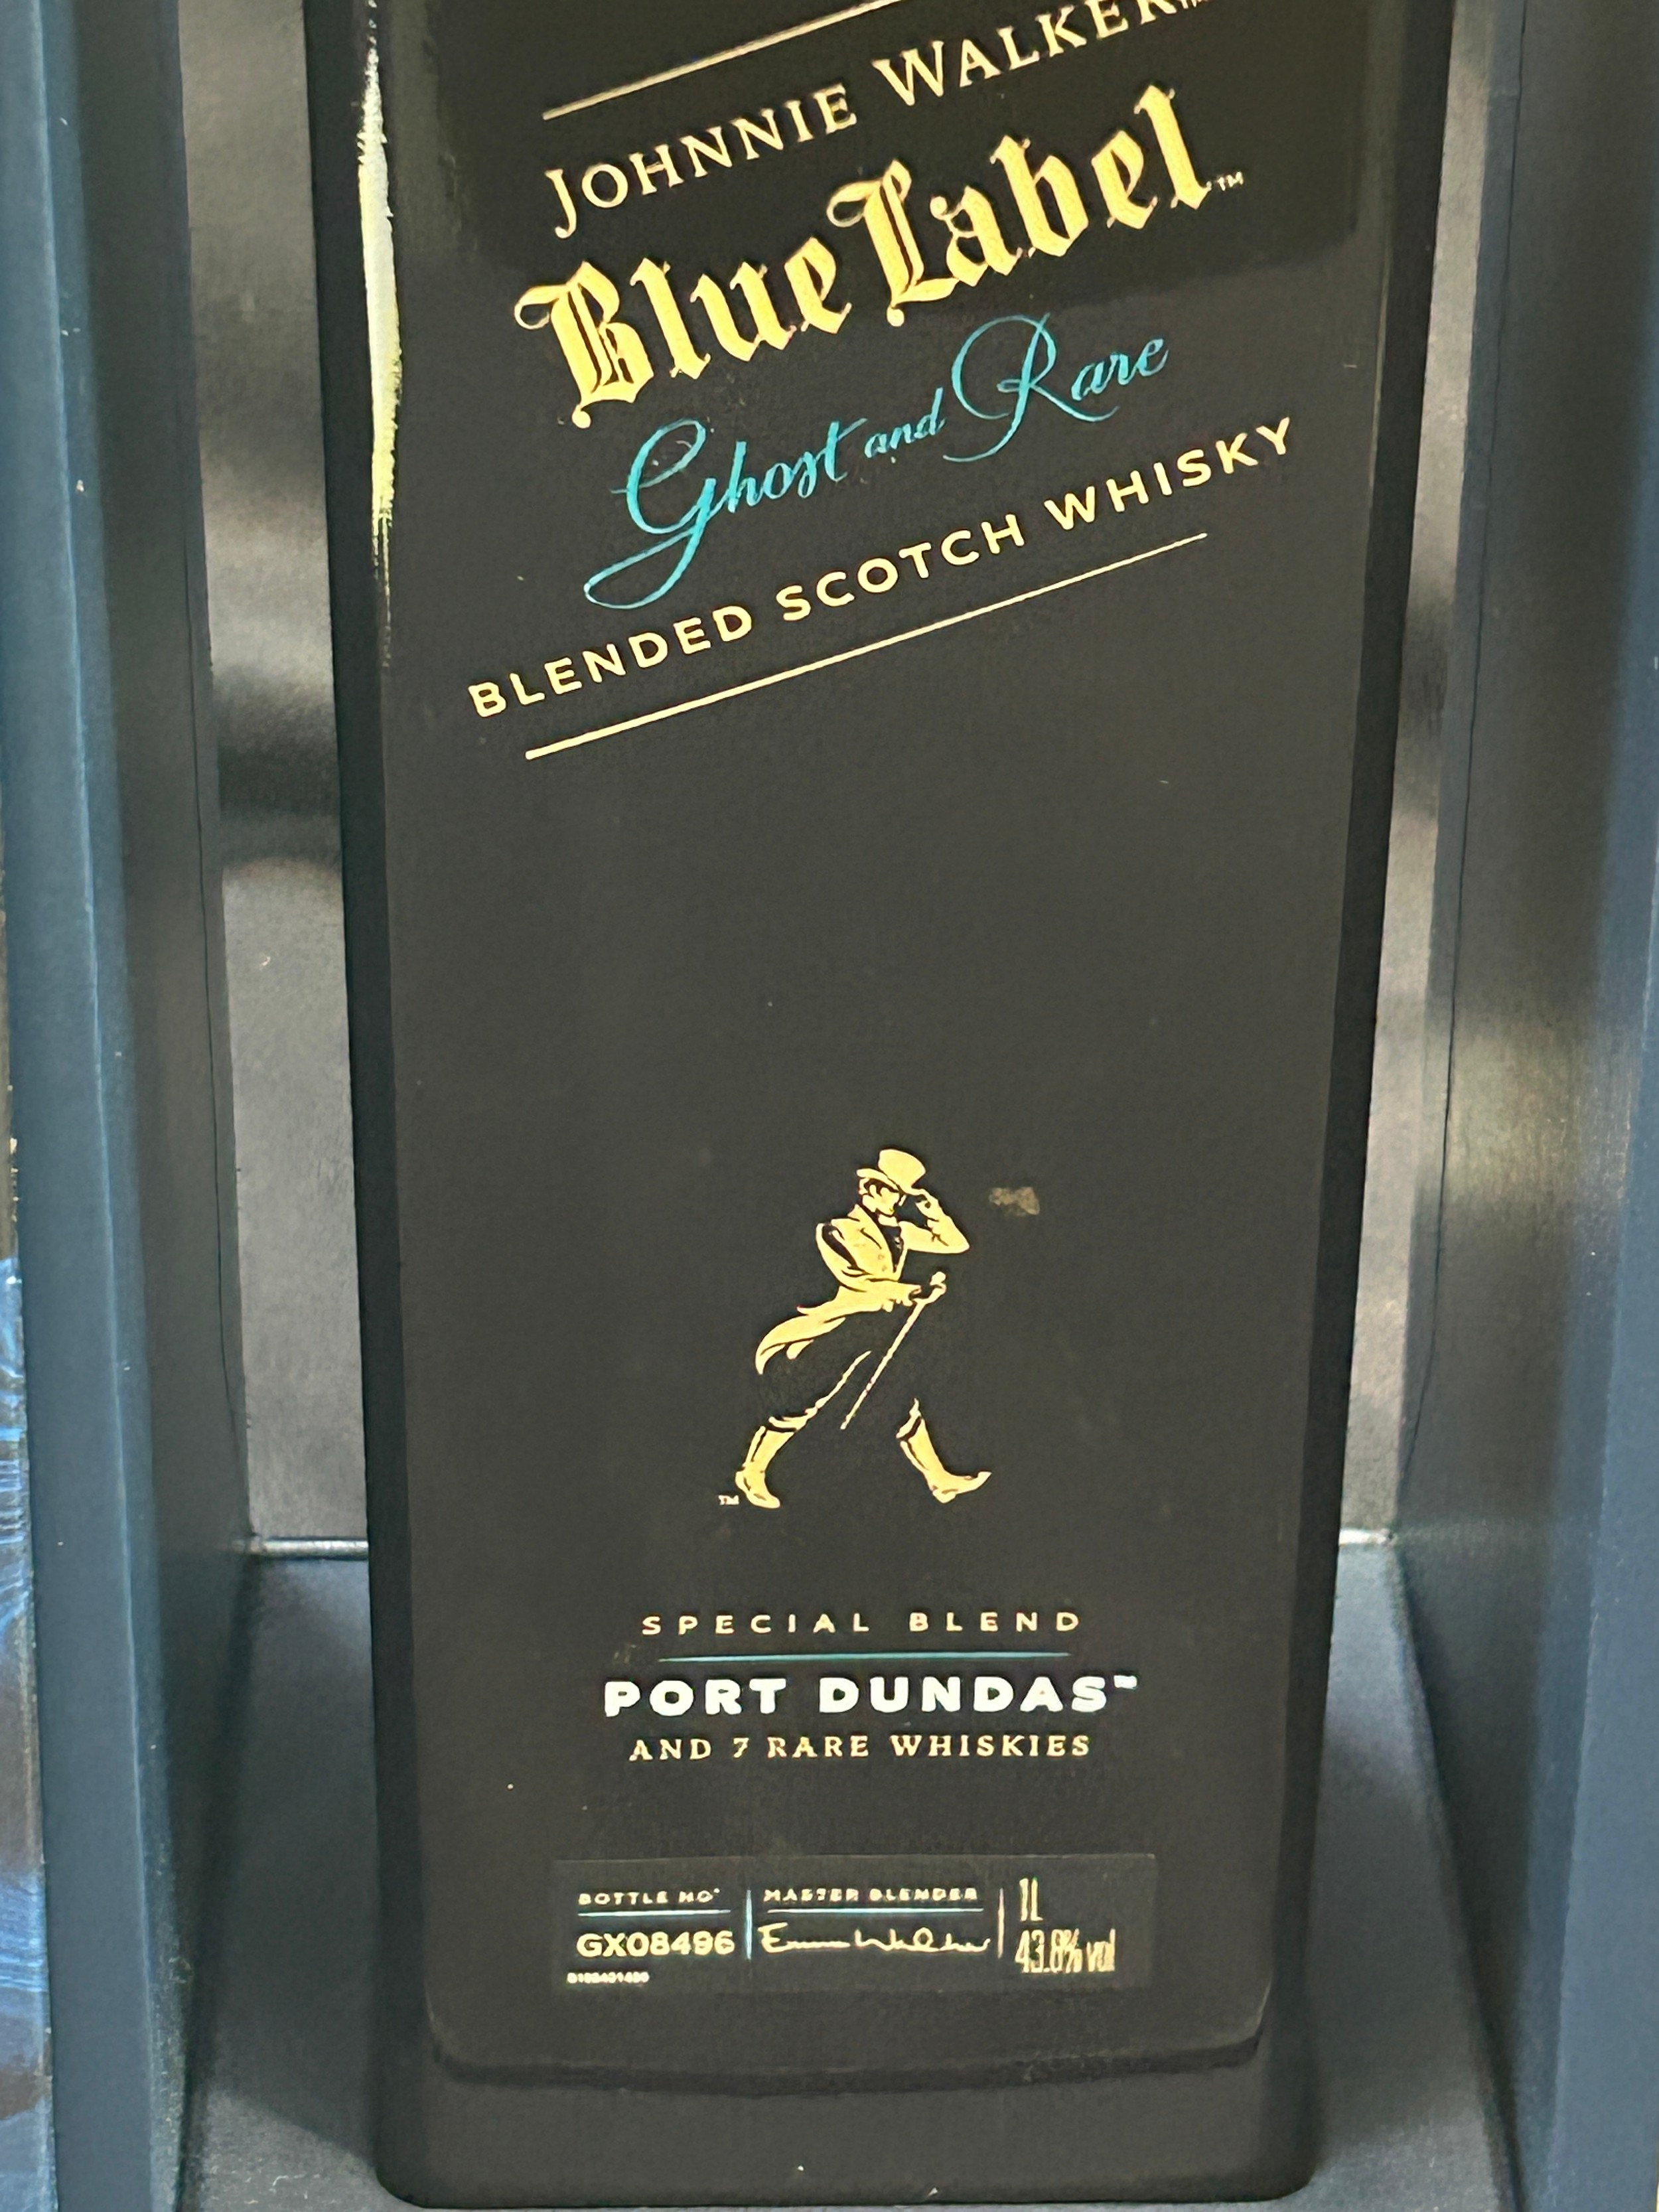 Boxed 1 litre bottle of Johnnie Walker Blue Label Ghost and rare whisky, sealed - Image 5 of 6